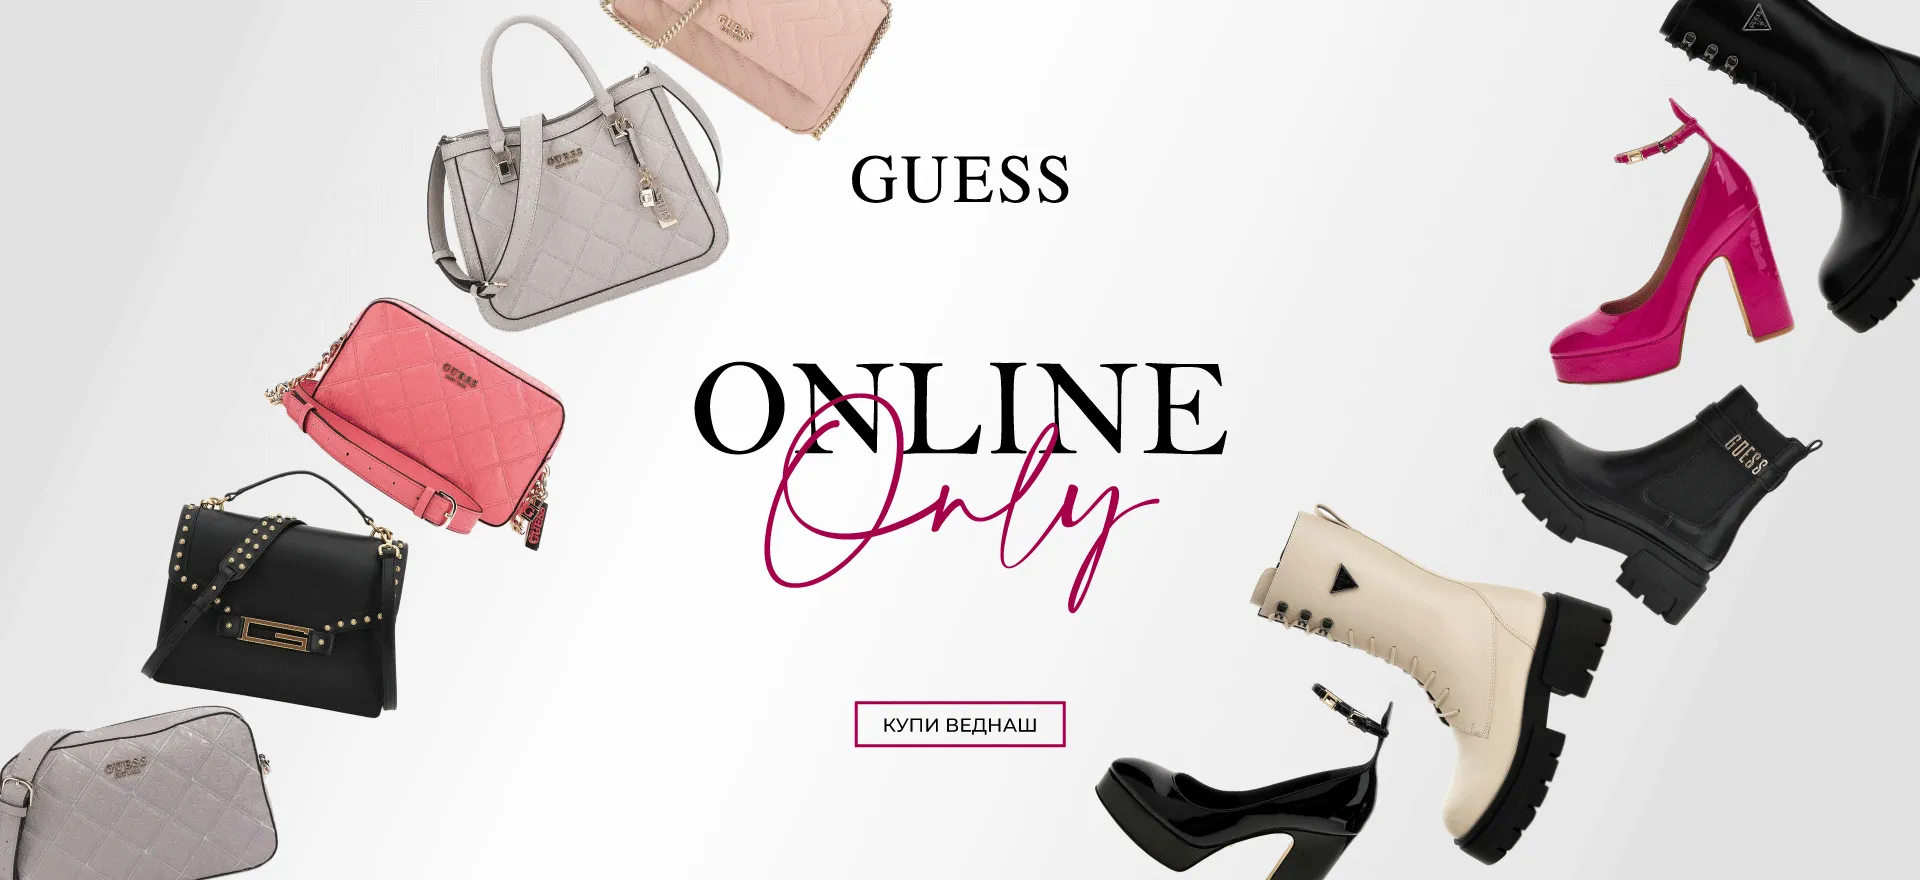 Guess online only